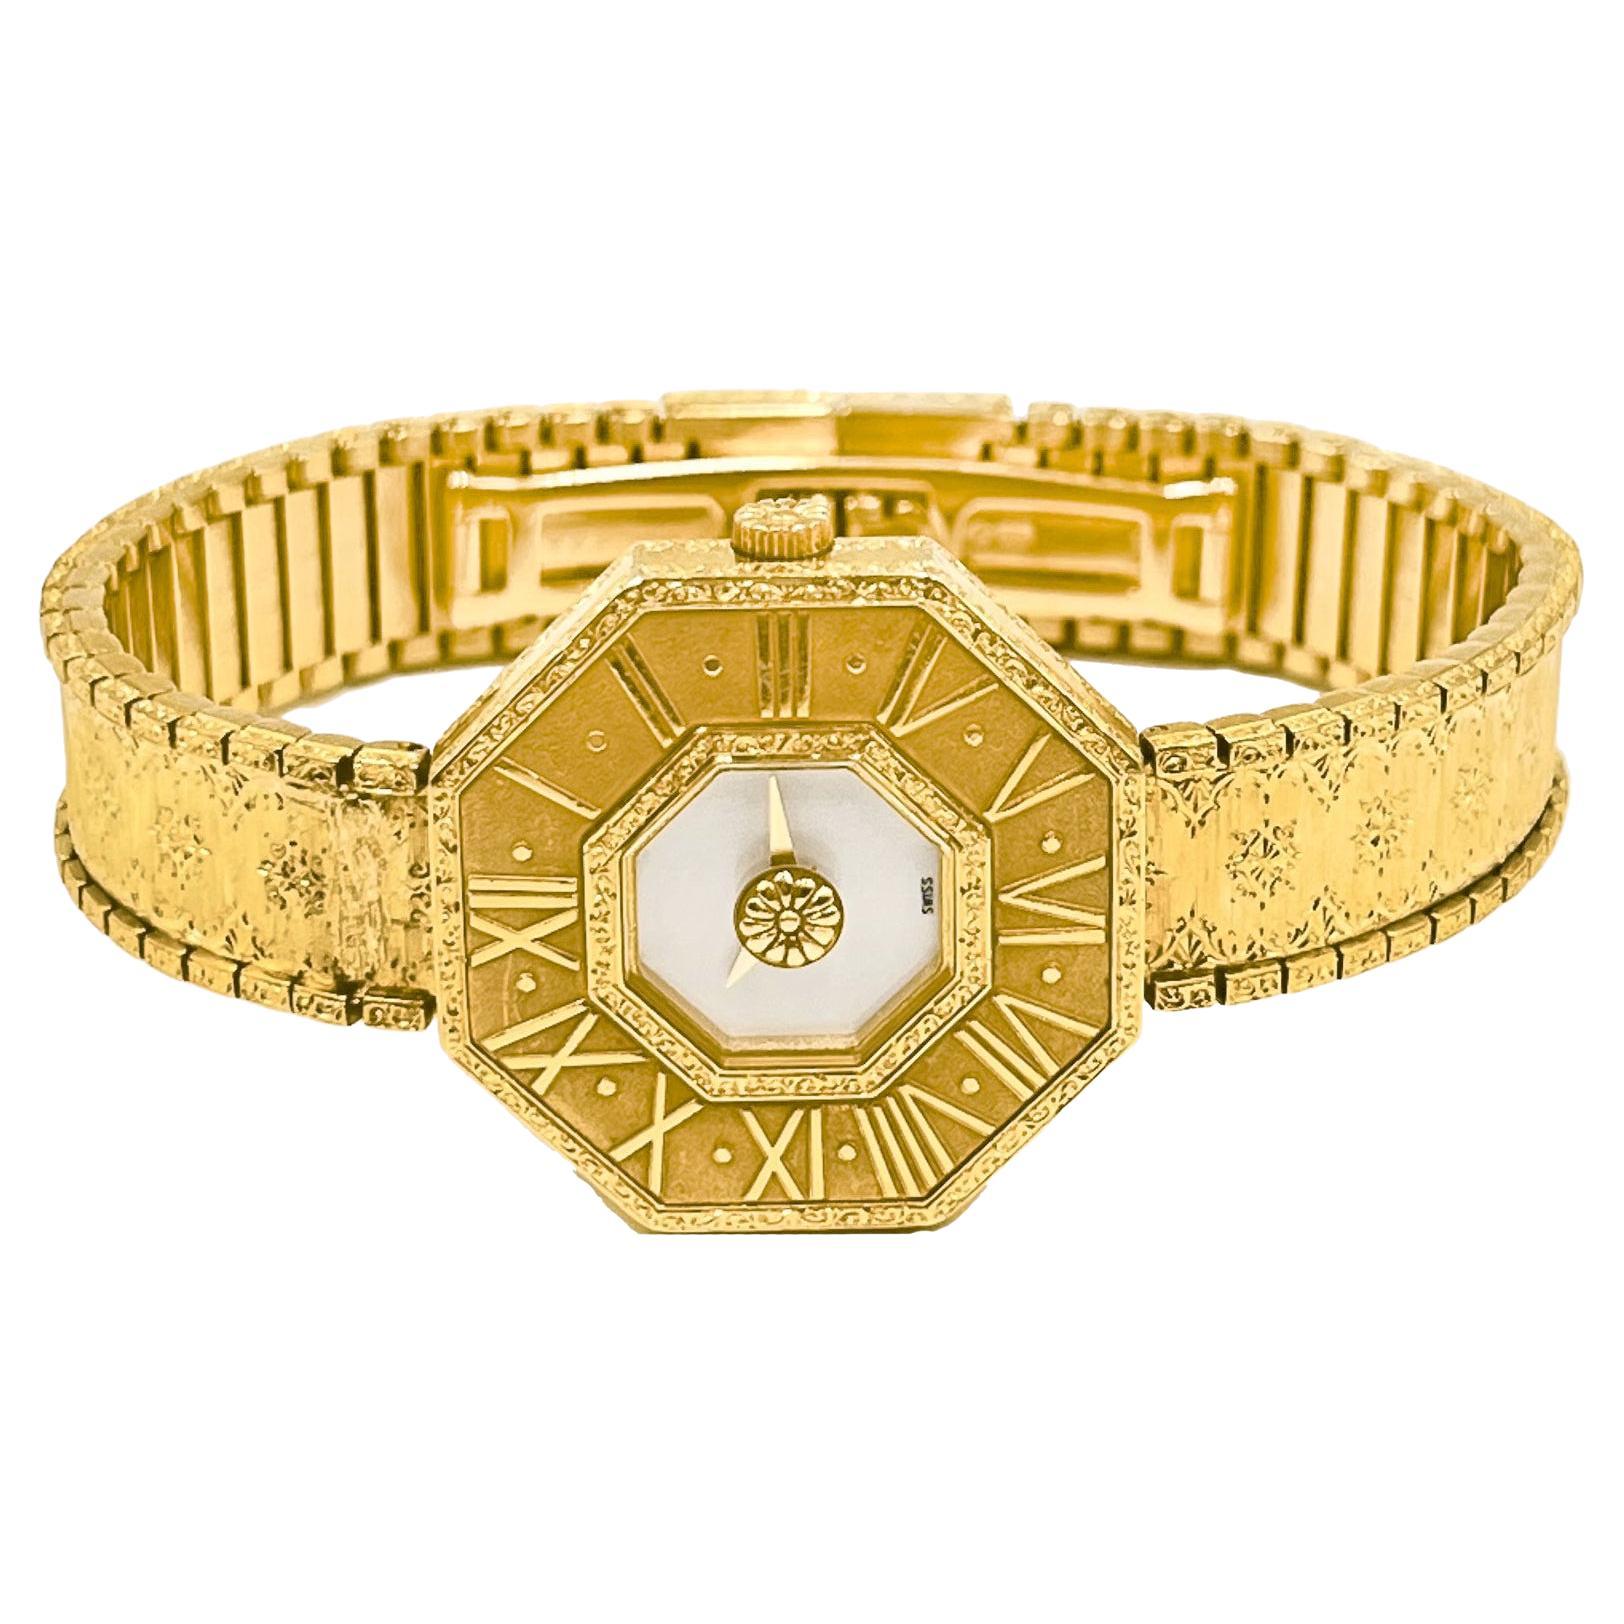 Designed by Gianmaria Buccellati, this 18k yellow gold Oktachron bracelet wristwatch features an octagonal 26mm case with Roman numeral-delineated bezel and mother-of-pearl dial. The band is engraved in Buccellati's signature 'rigato' style which